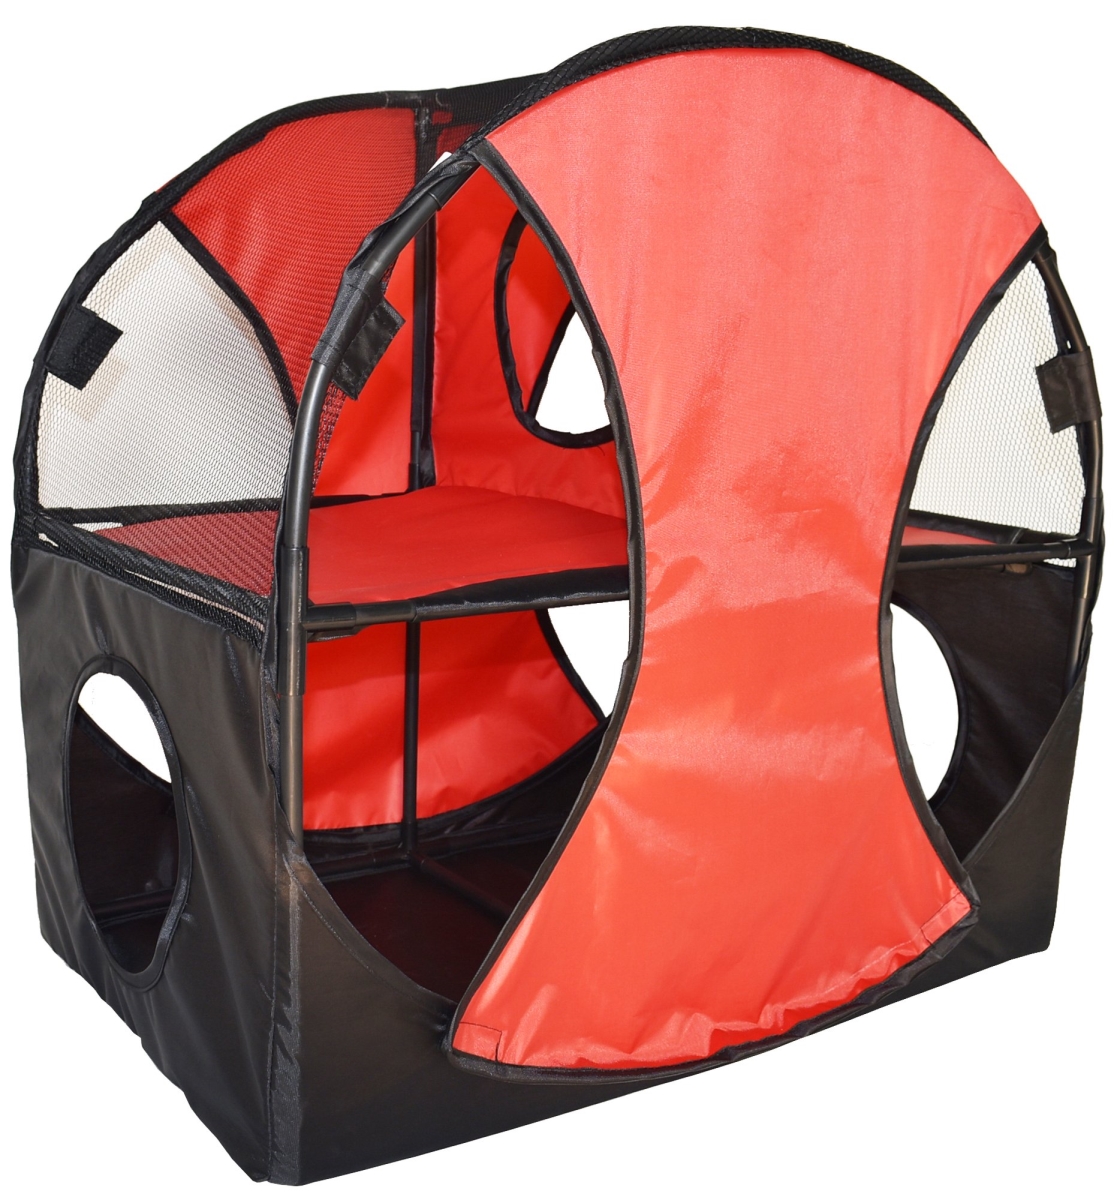 Pet Life Ptt7rdbk Kitty Play Pet Cat House, Red & Black - One Size